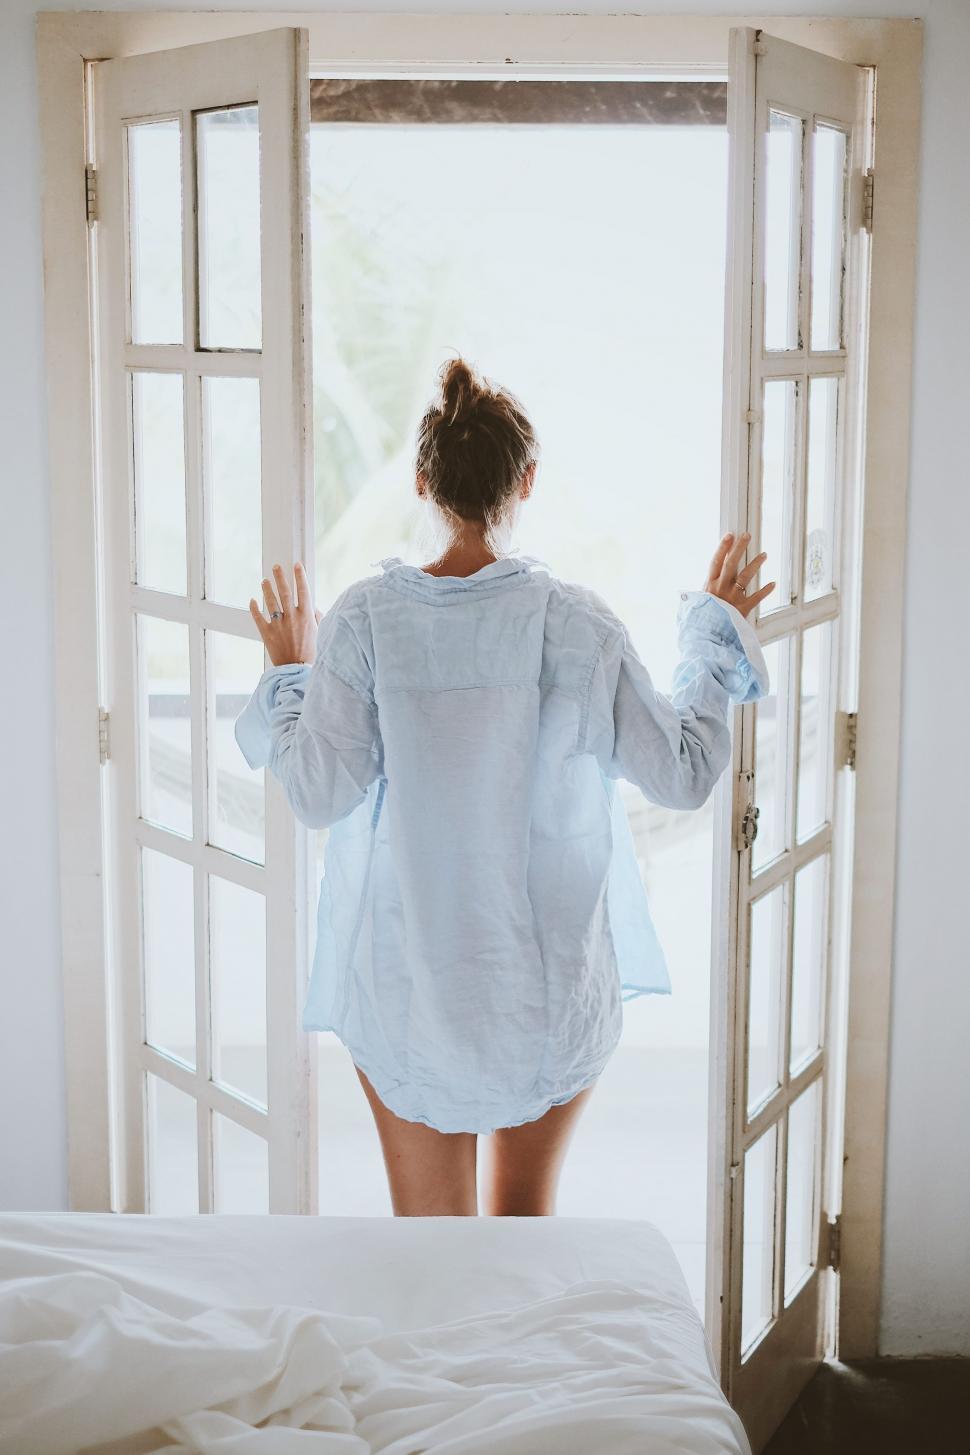 Free Image of Backside View of woman in blue shirt standing near bedroom window 